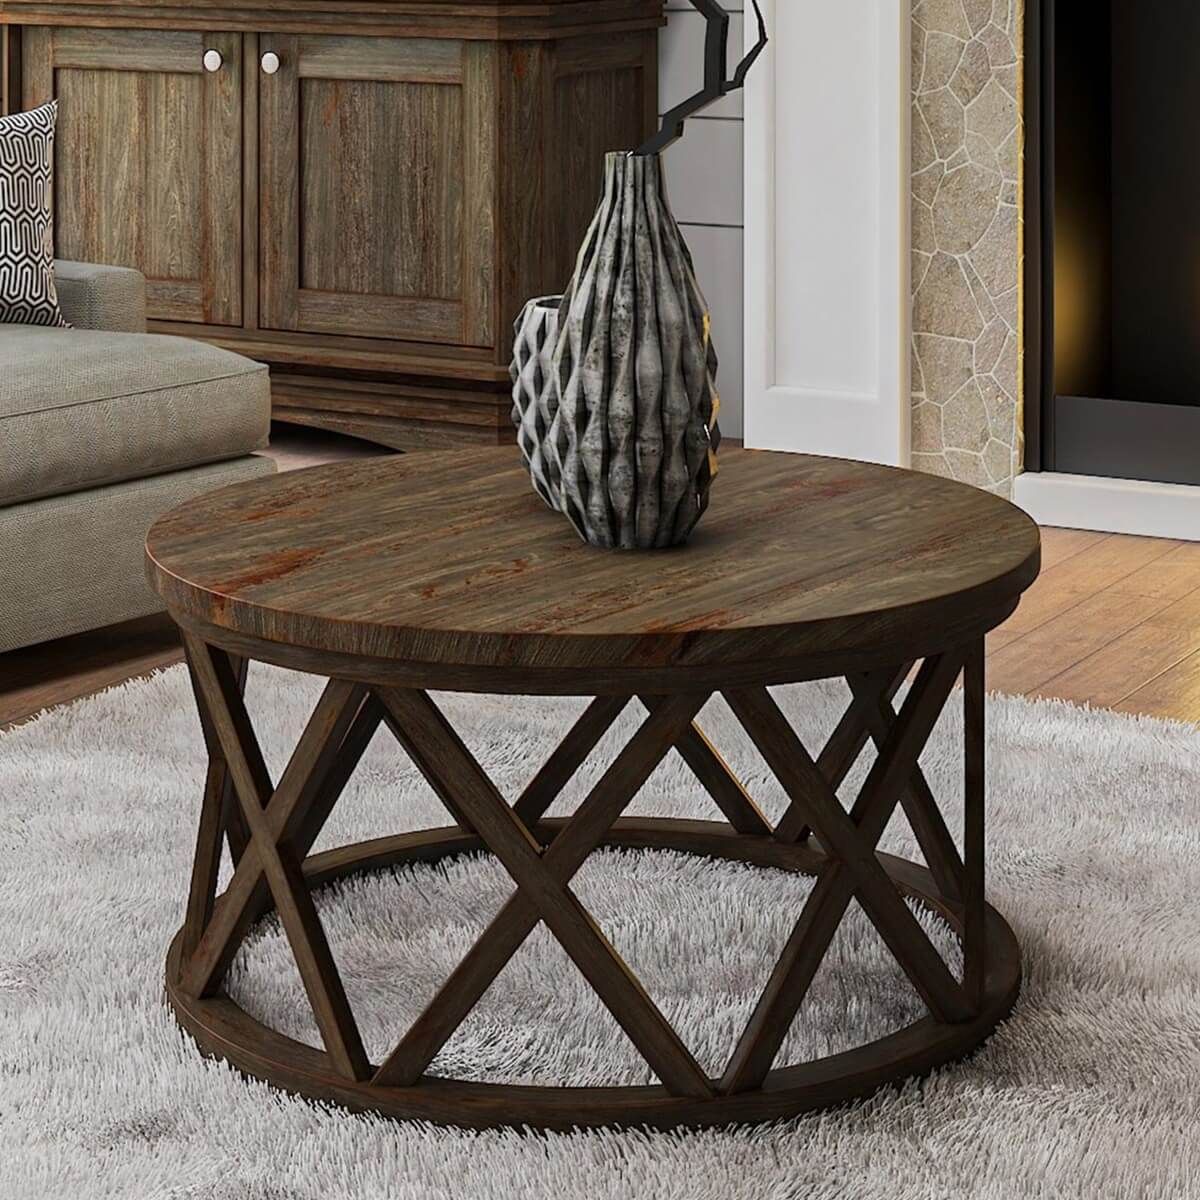 Mariefred Rustic Transitional Style Teak Wood Round Coffee Table With Regard To Rustic Round Coffee Tables (View 3 of 15)